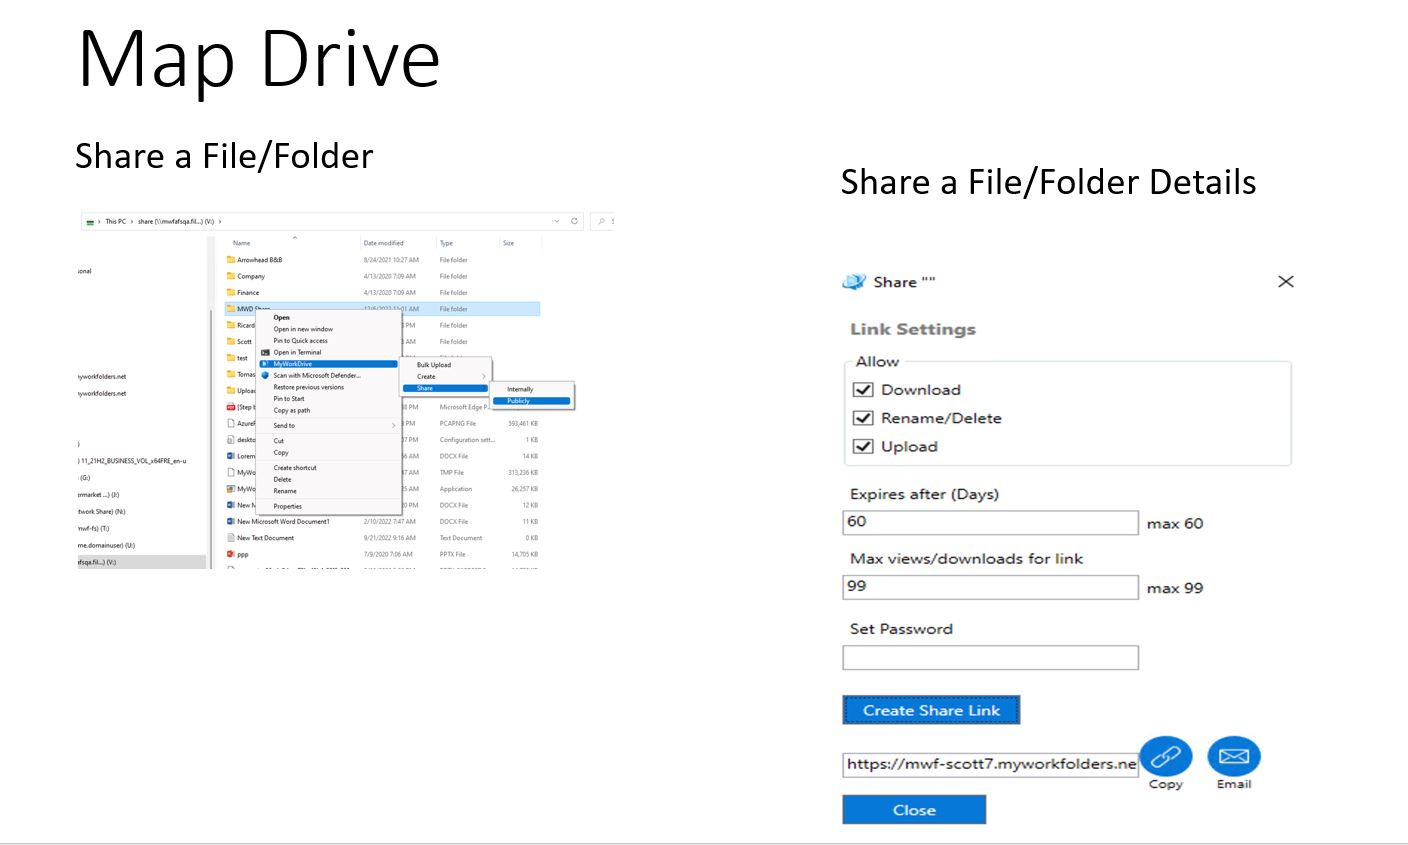 Mapped Drive Client with Public Sharing